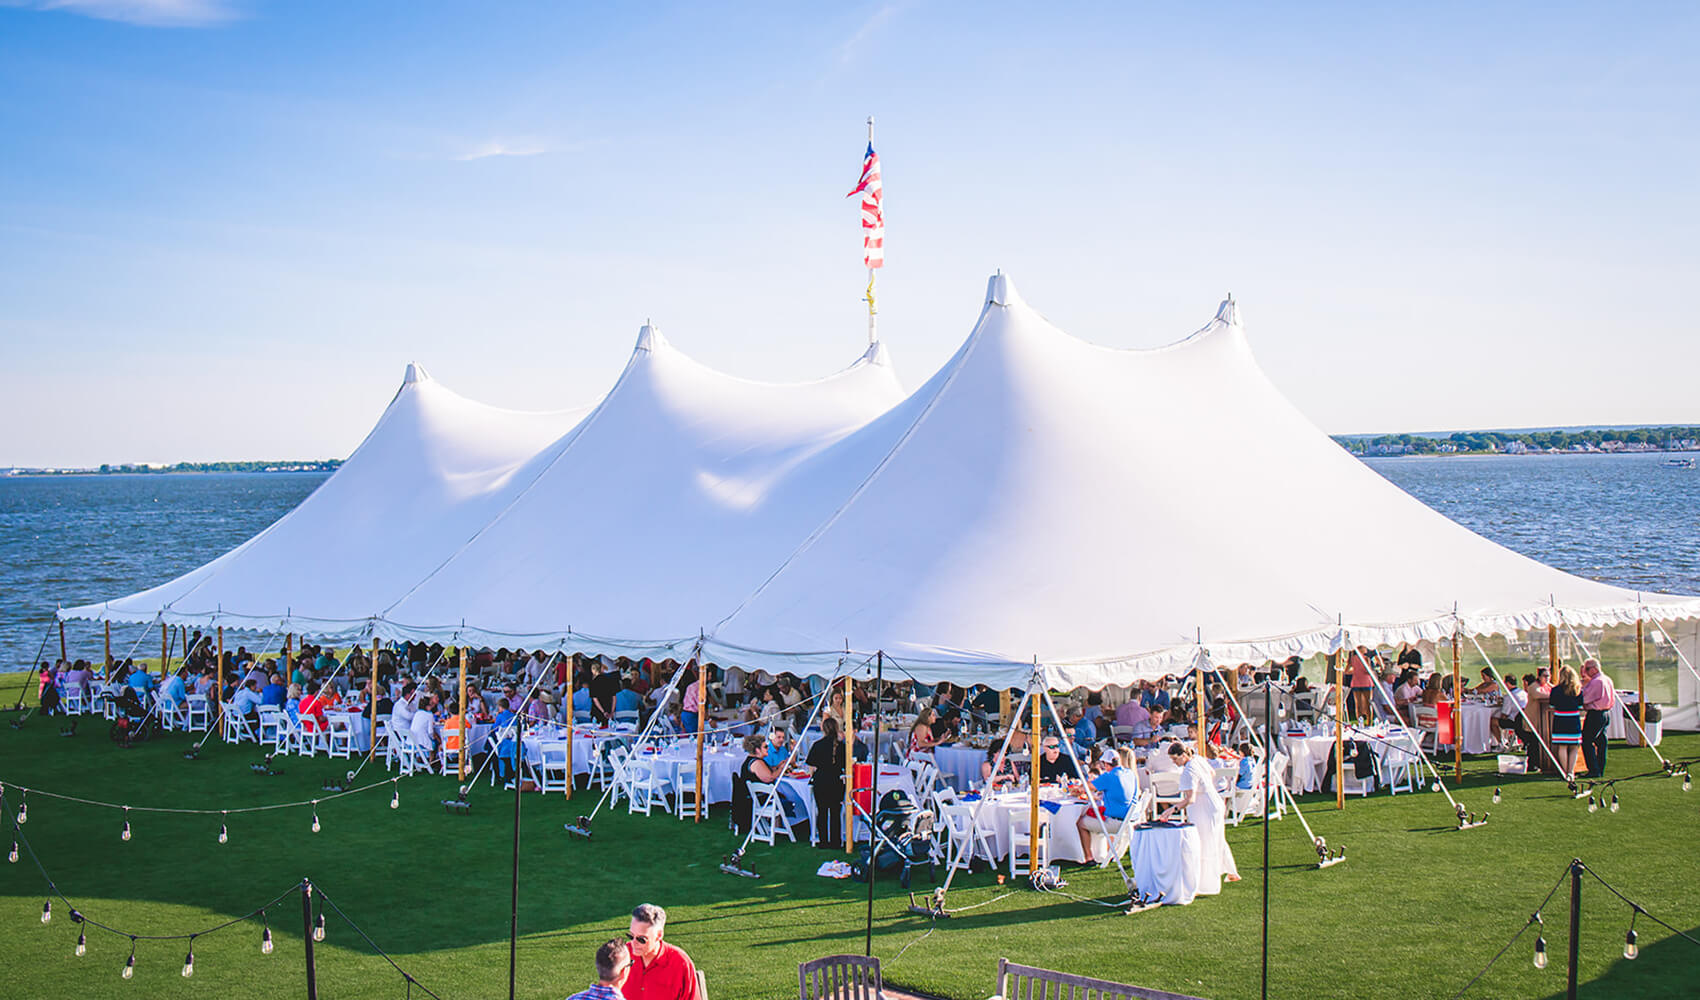 outdoor social event under large white tent